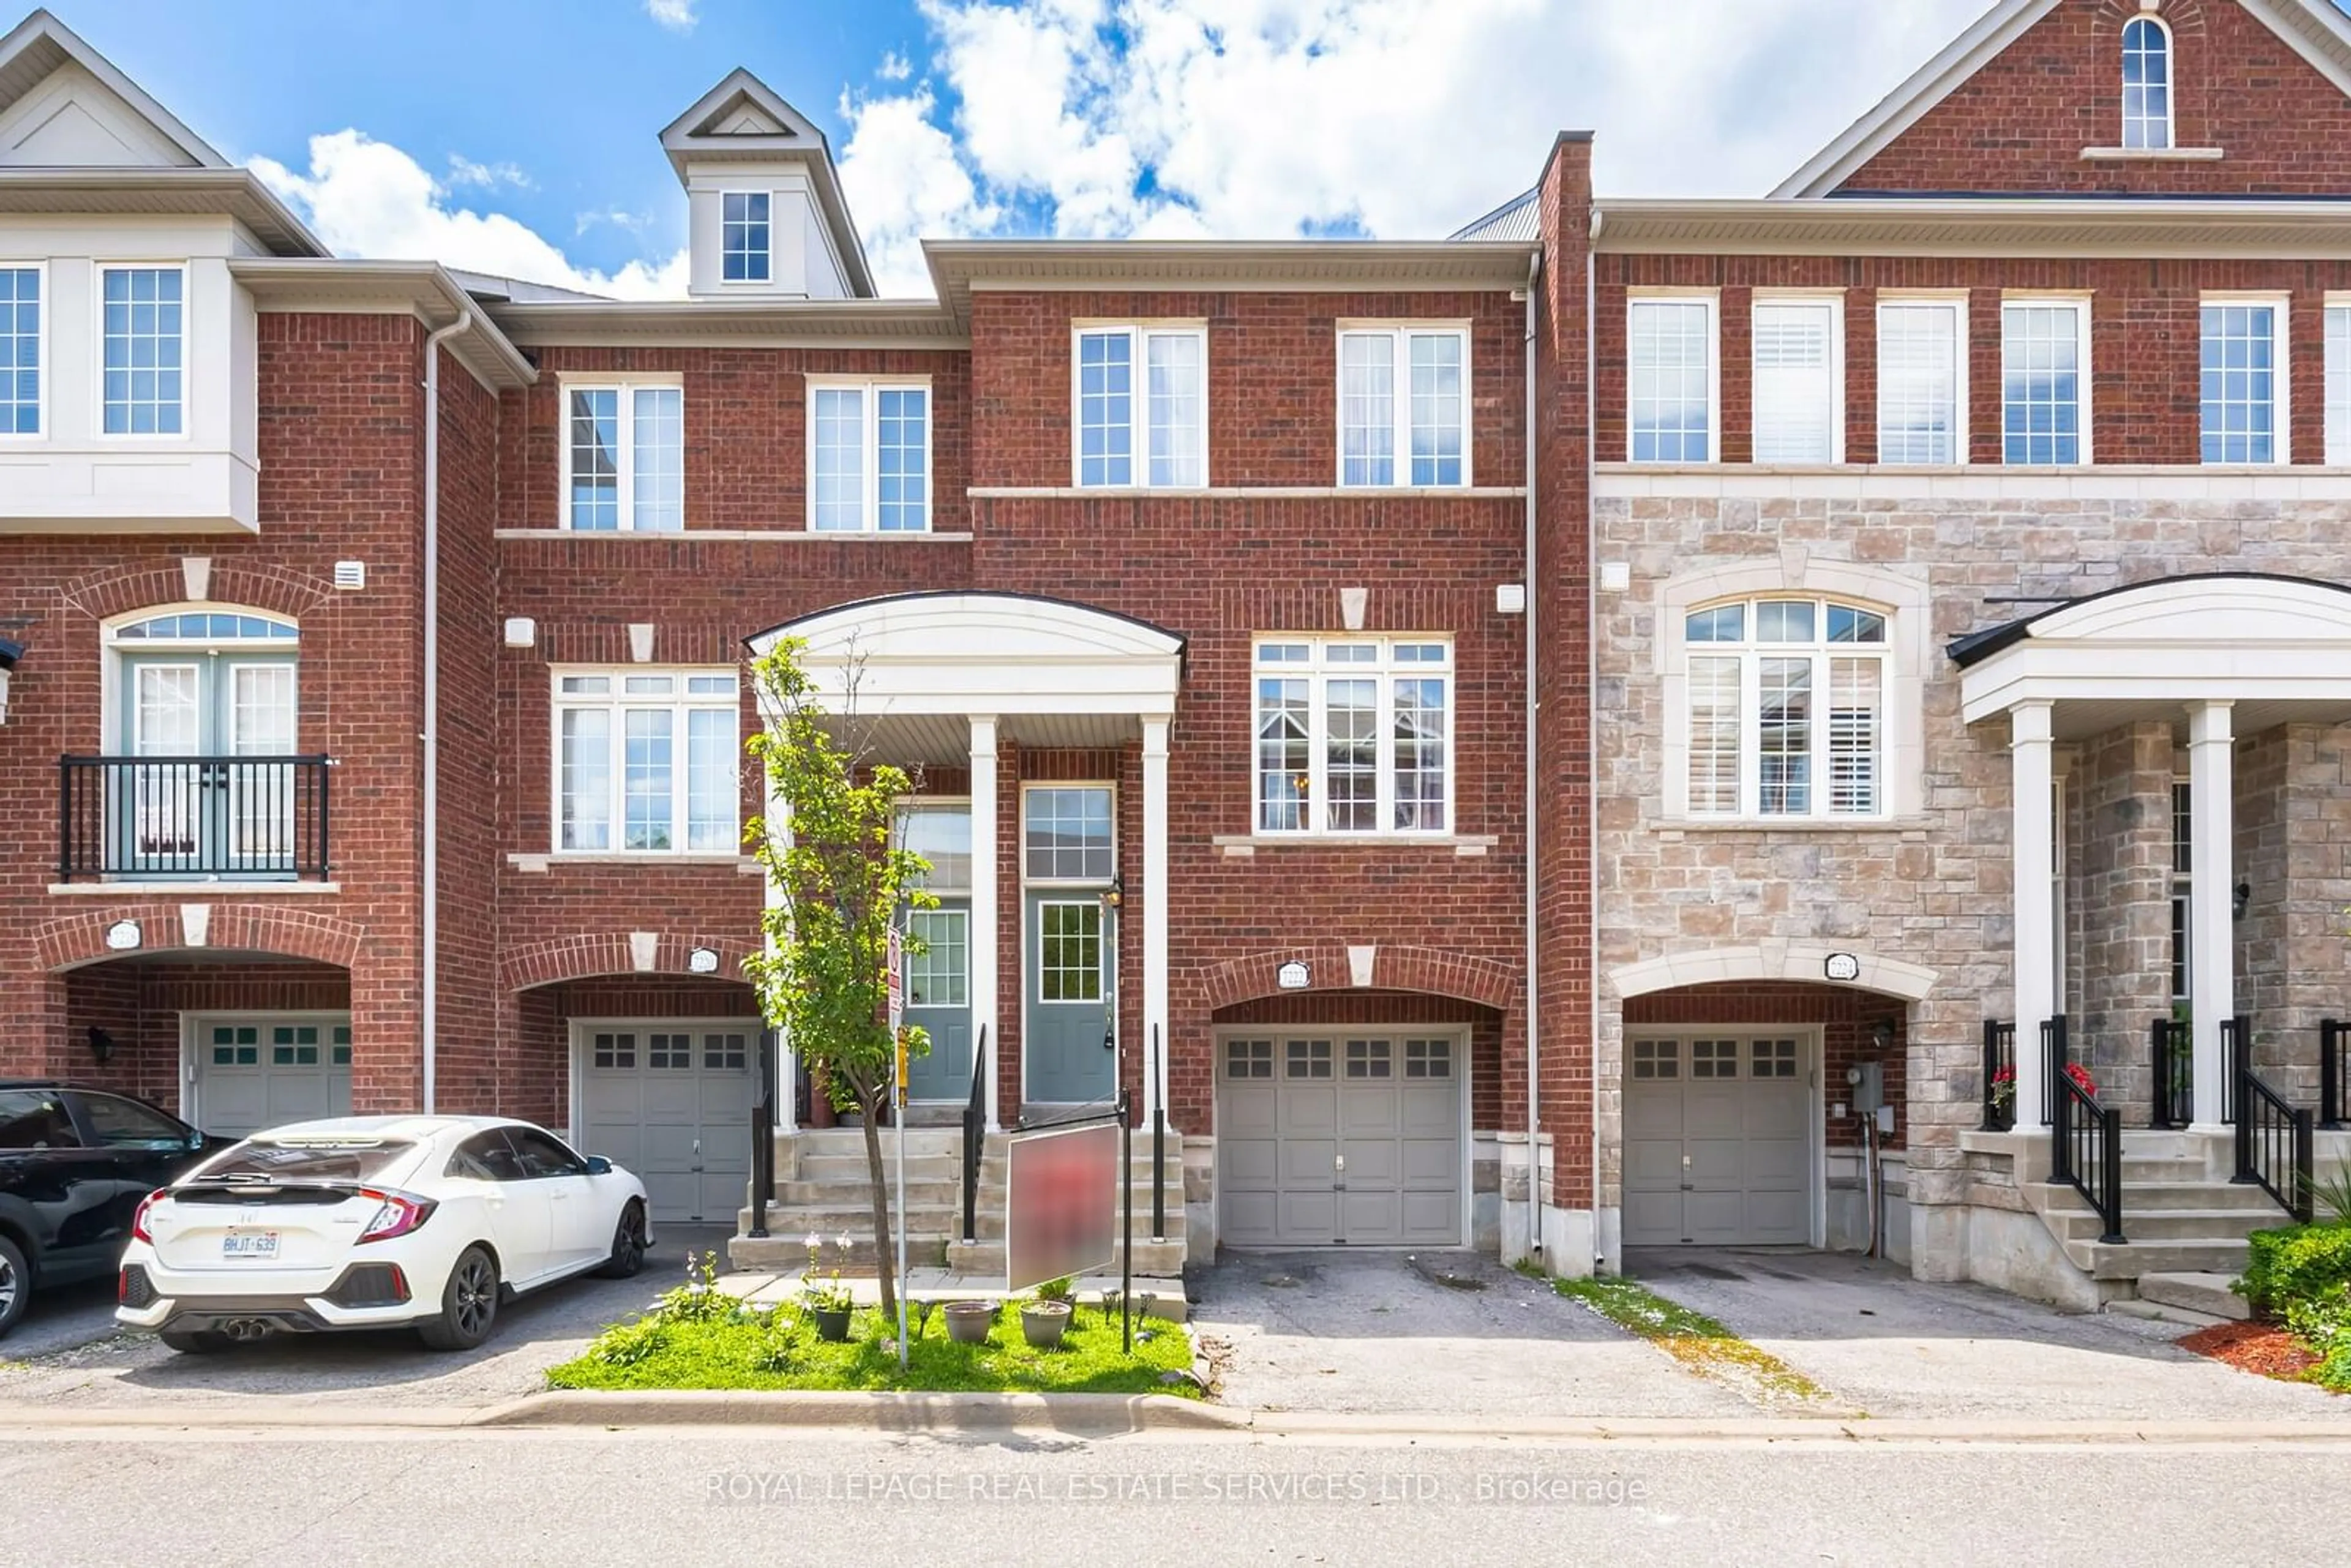 Home with brick exterior material for 7222 Triumph Lane #69, Mississauga Ontario L5N 0C5